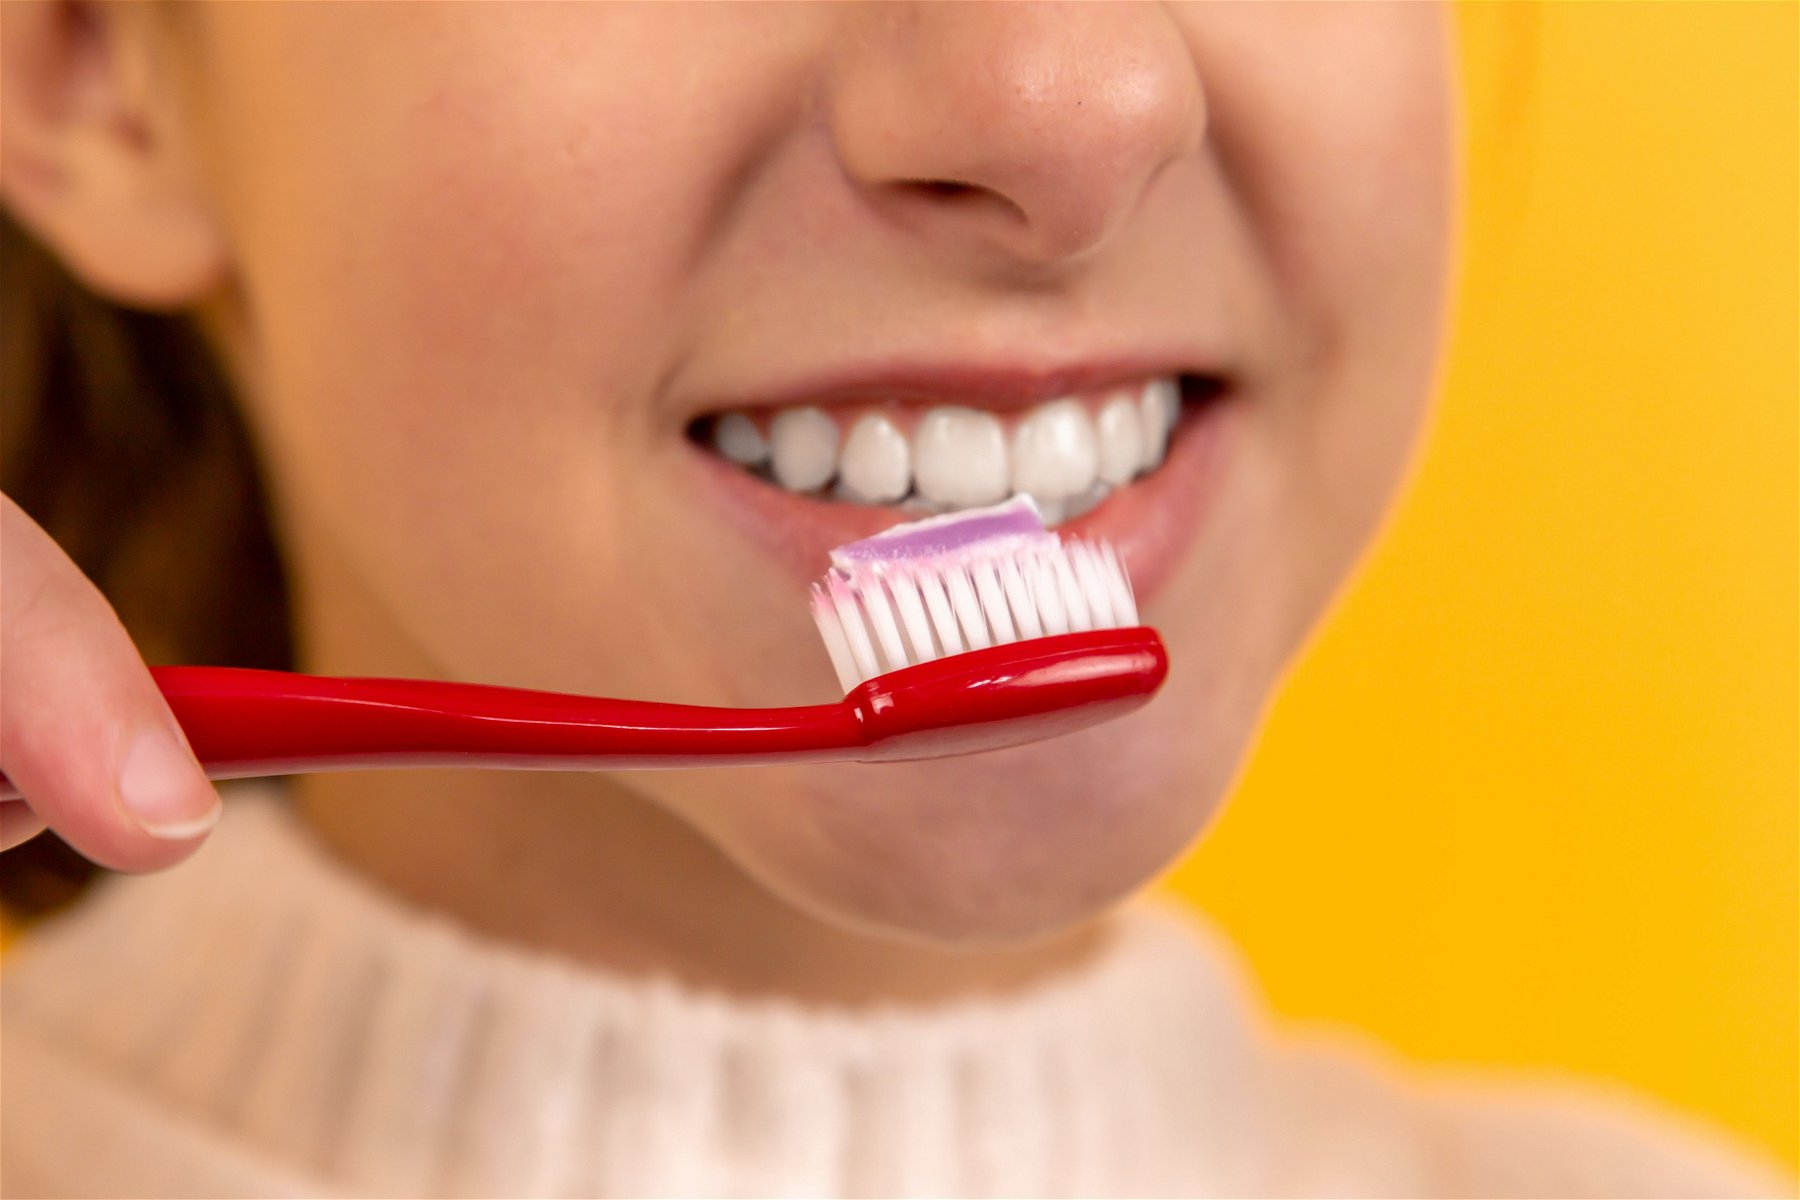 The Teeth Cleaning Revolution: Exploring the Surging Trend of DIY Teeth Cleaning at Home